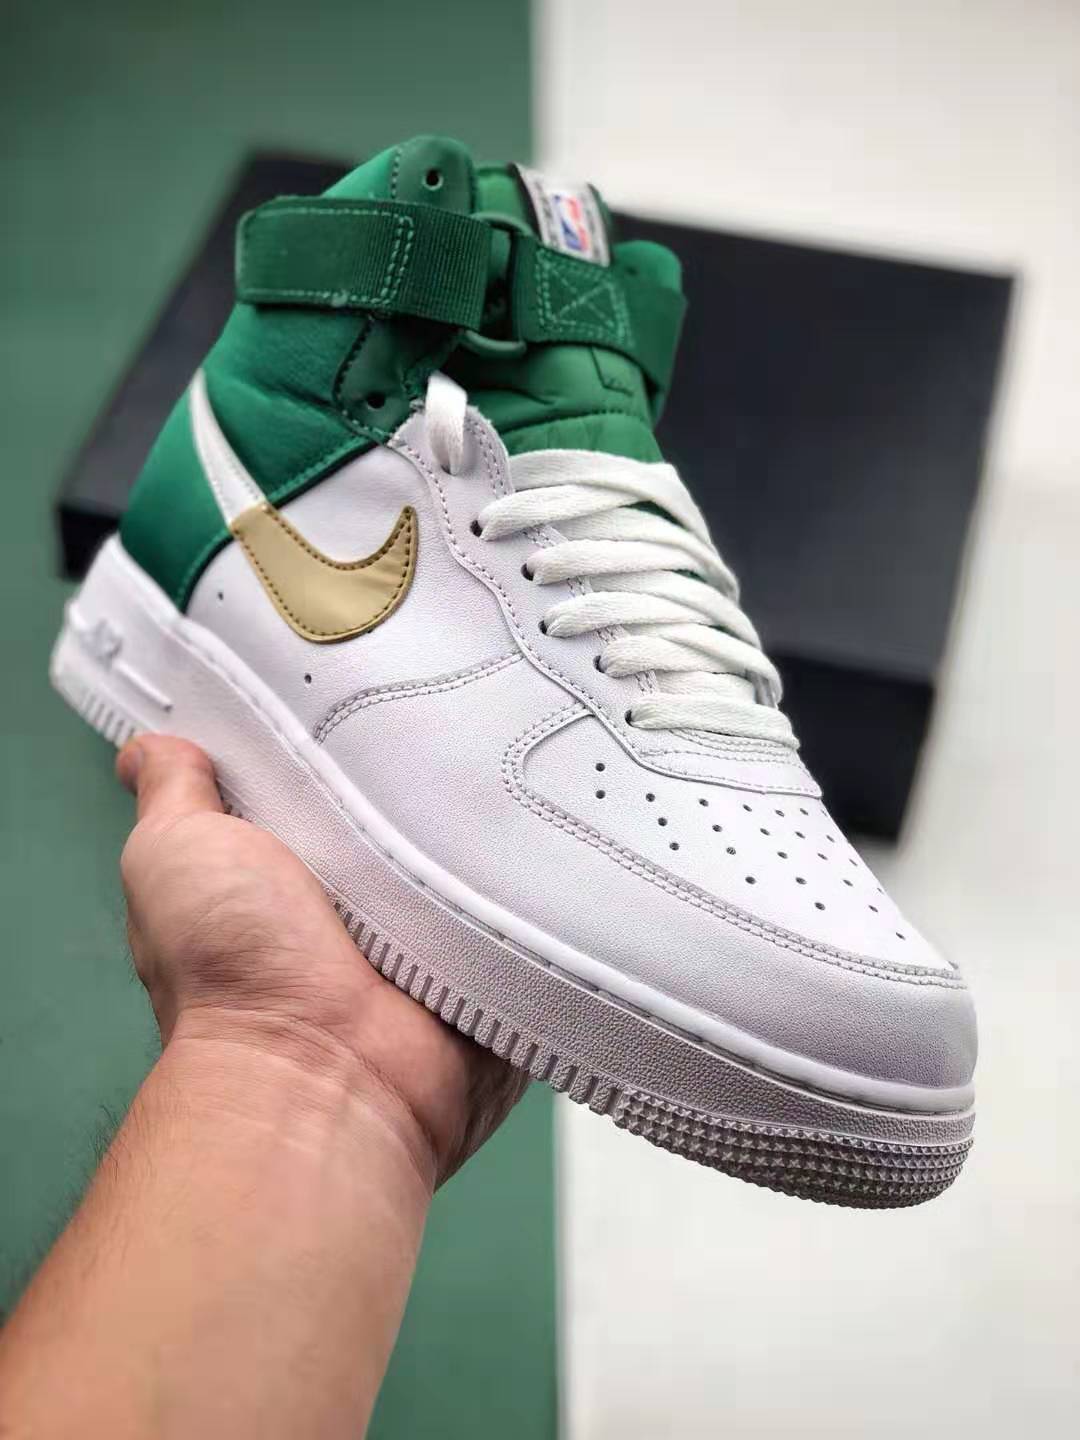 Nike NBA x Air Force 1 High Celtics White Green Gold BQ4591-100 - It's Time for Some Championship Style!